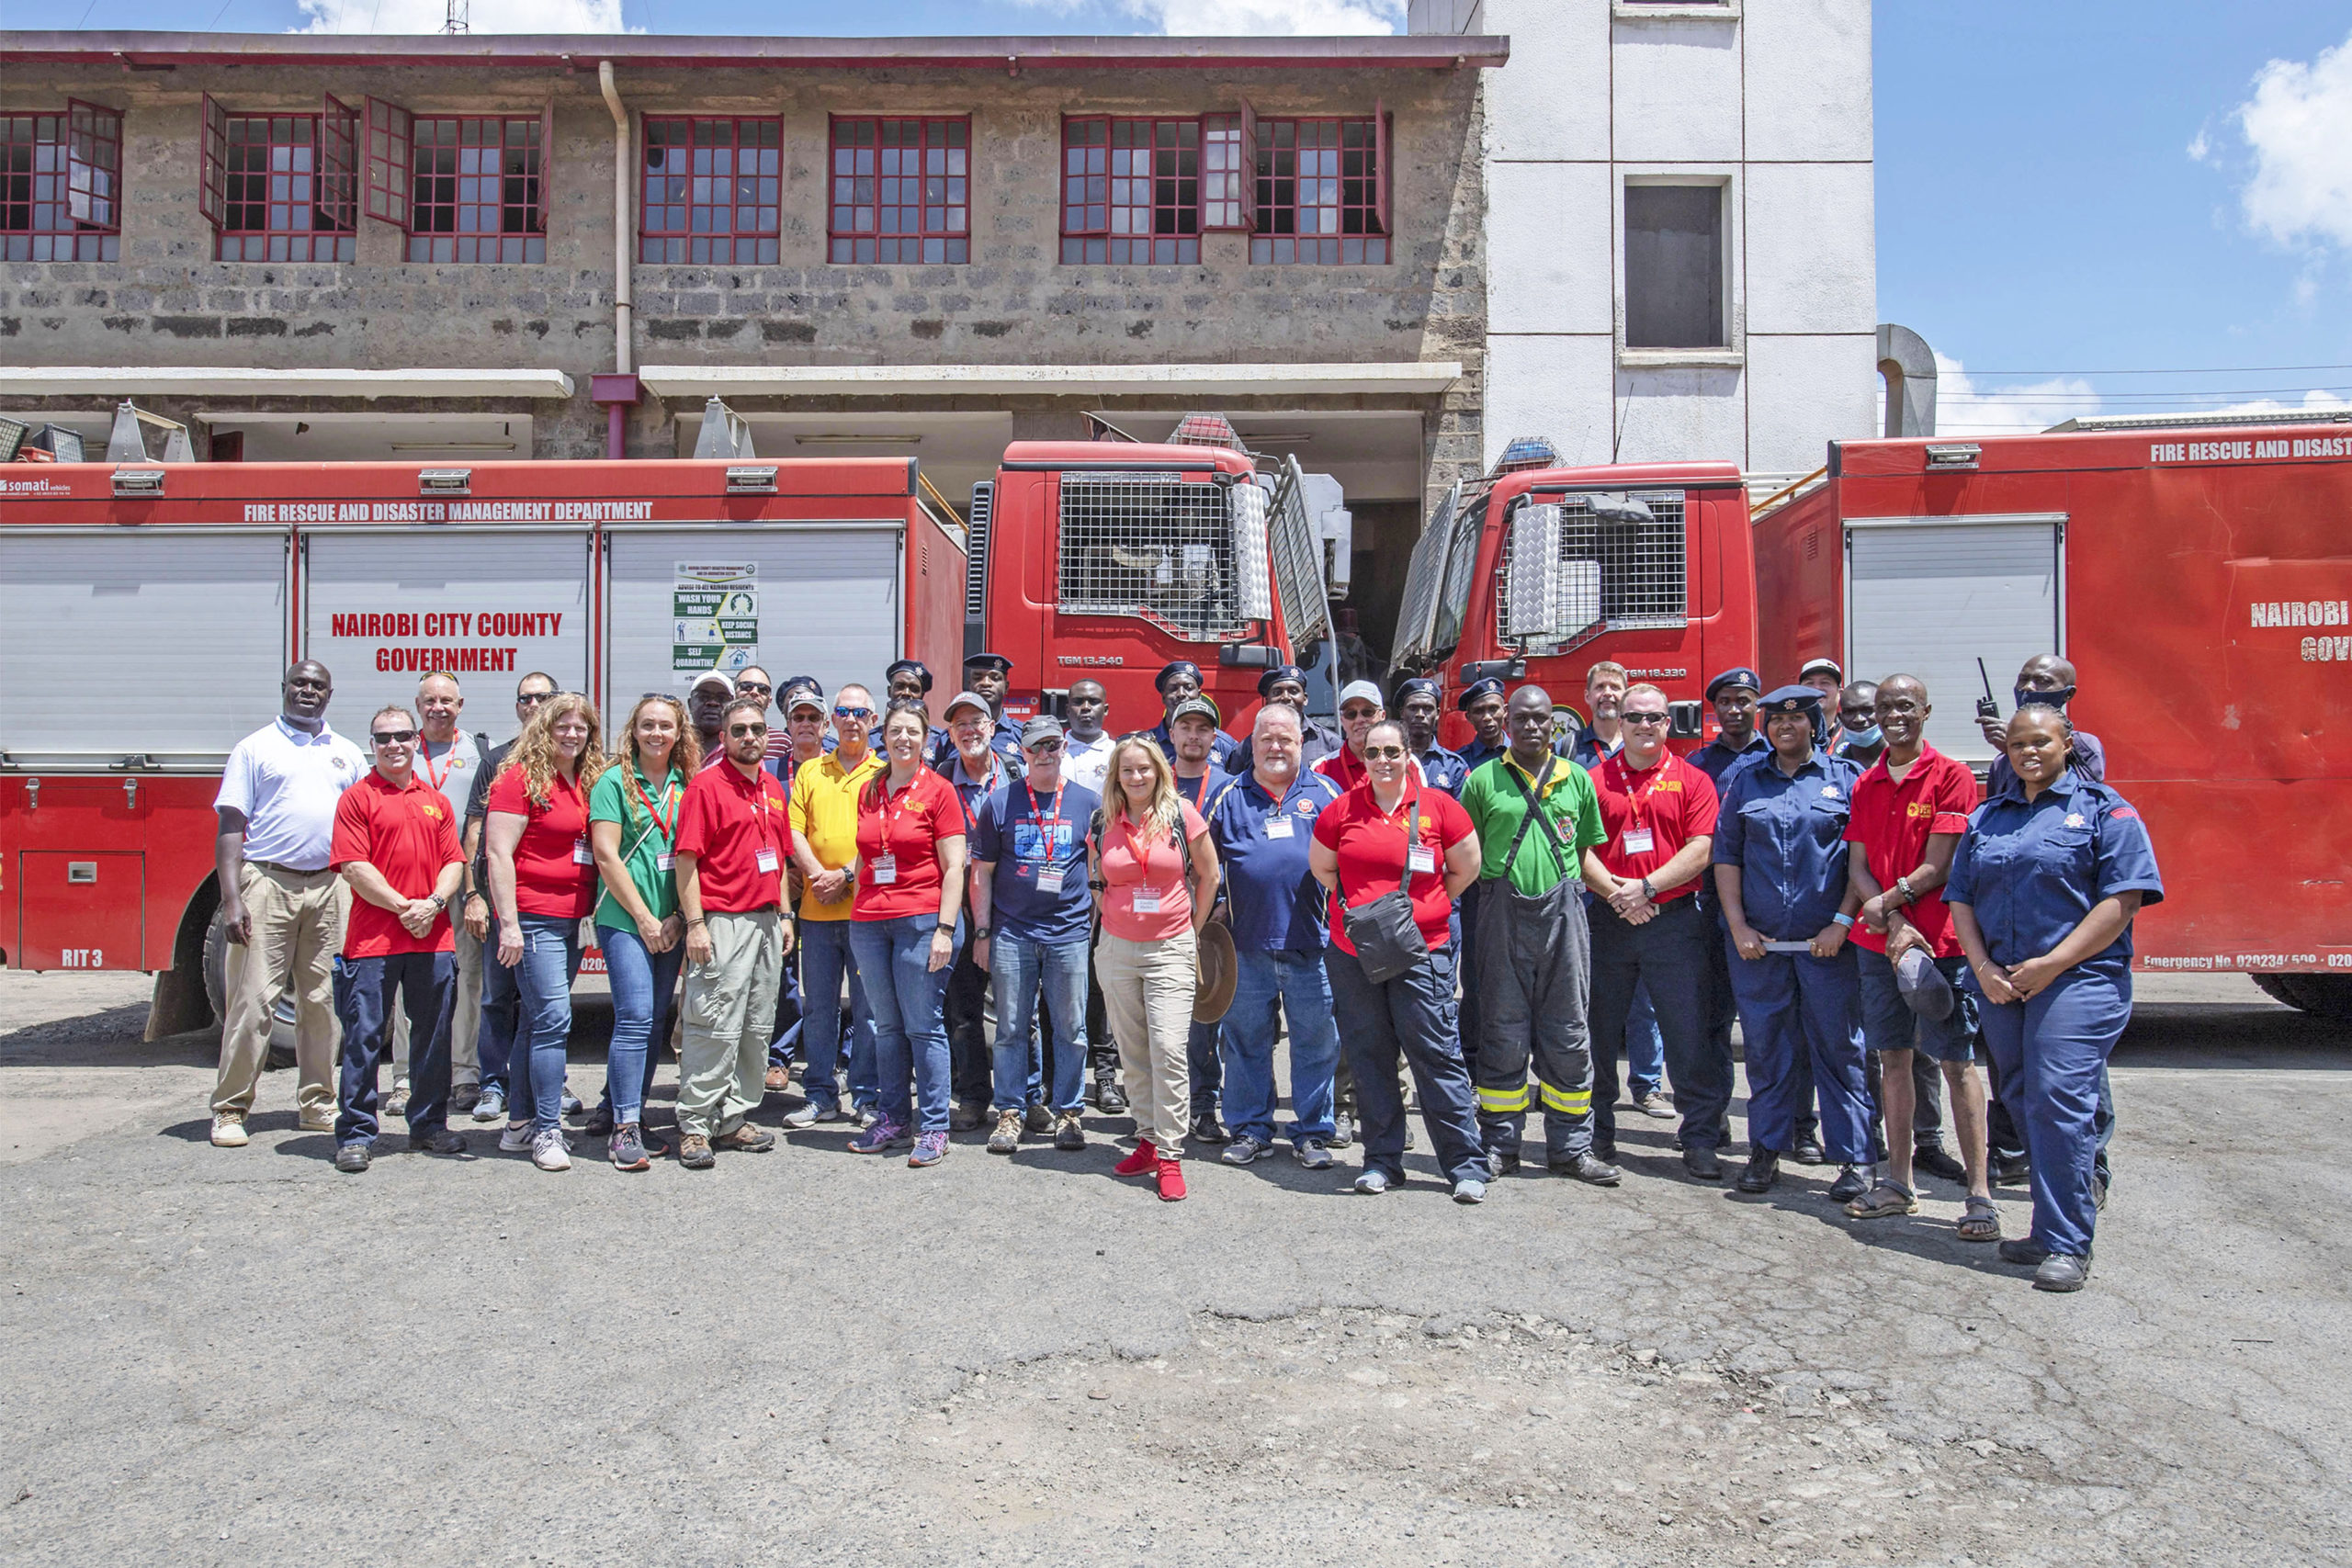 American firefighters shared information and ladder rescue training with members of the Kenyan Fire Service at the Enterprise Road Substation fire station in Nairobi, Kenya, as part of an Africa Fire Mission trip in November.